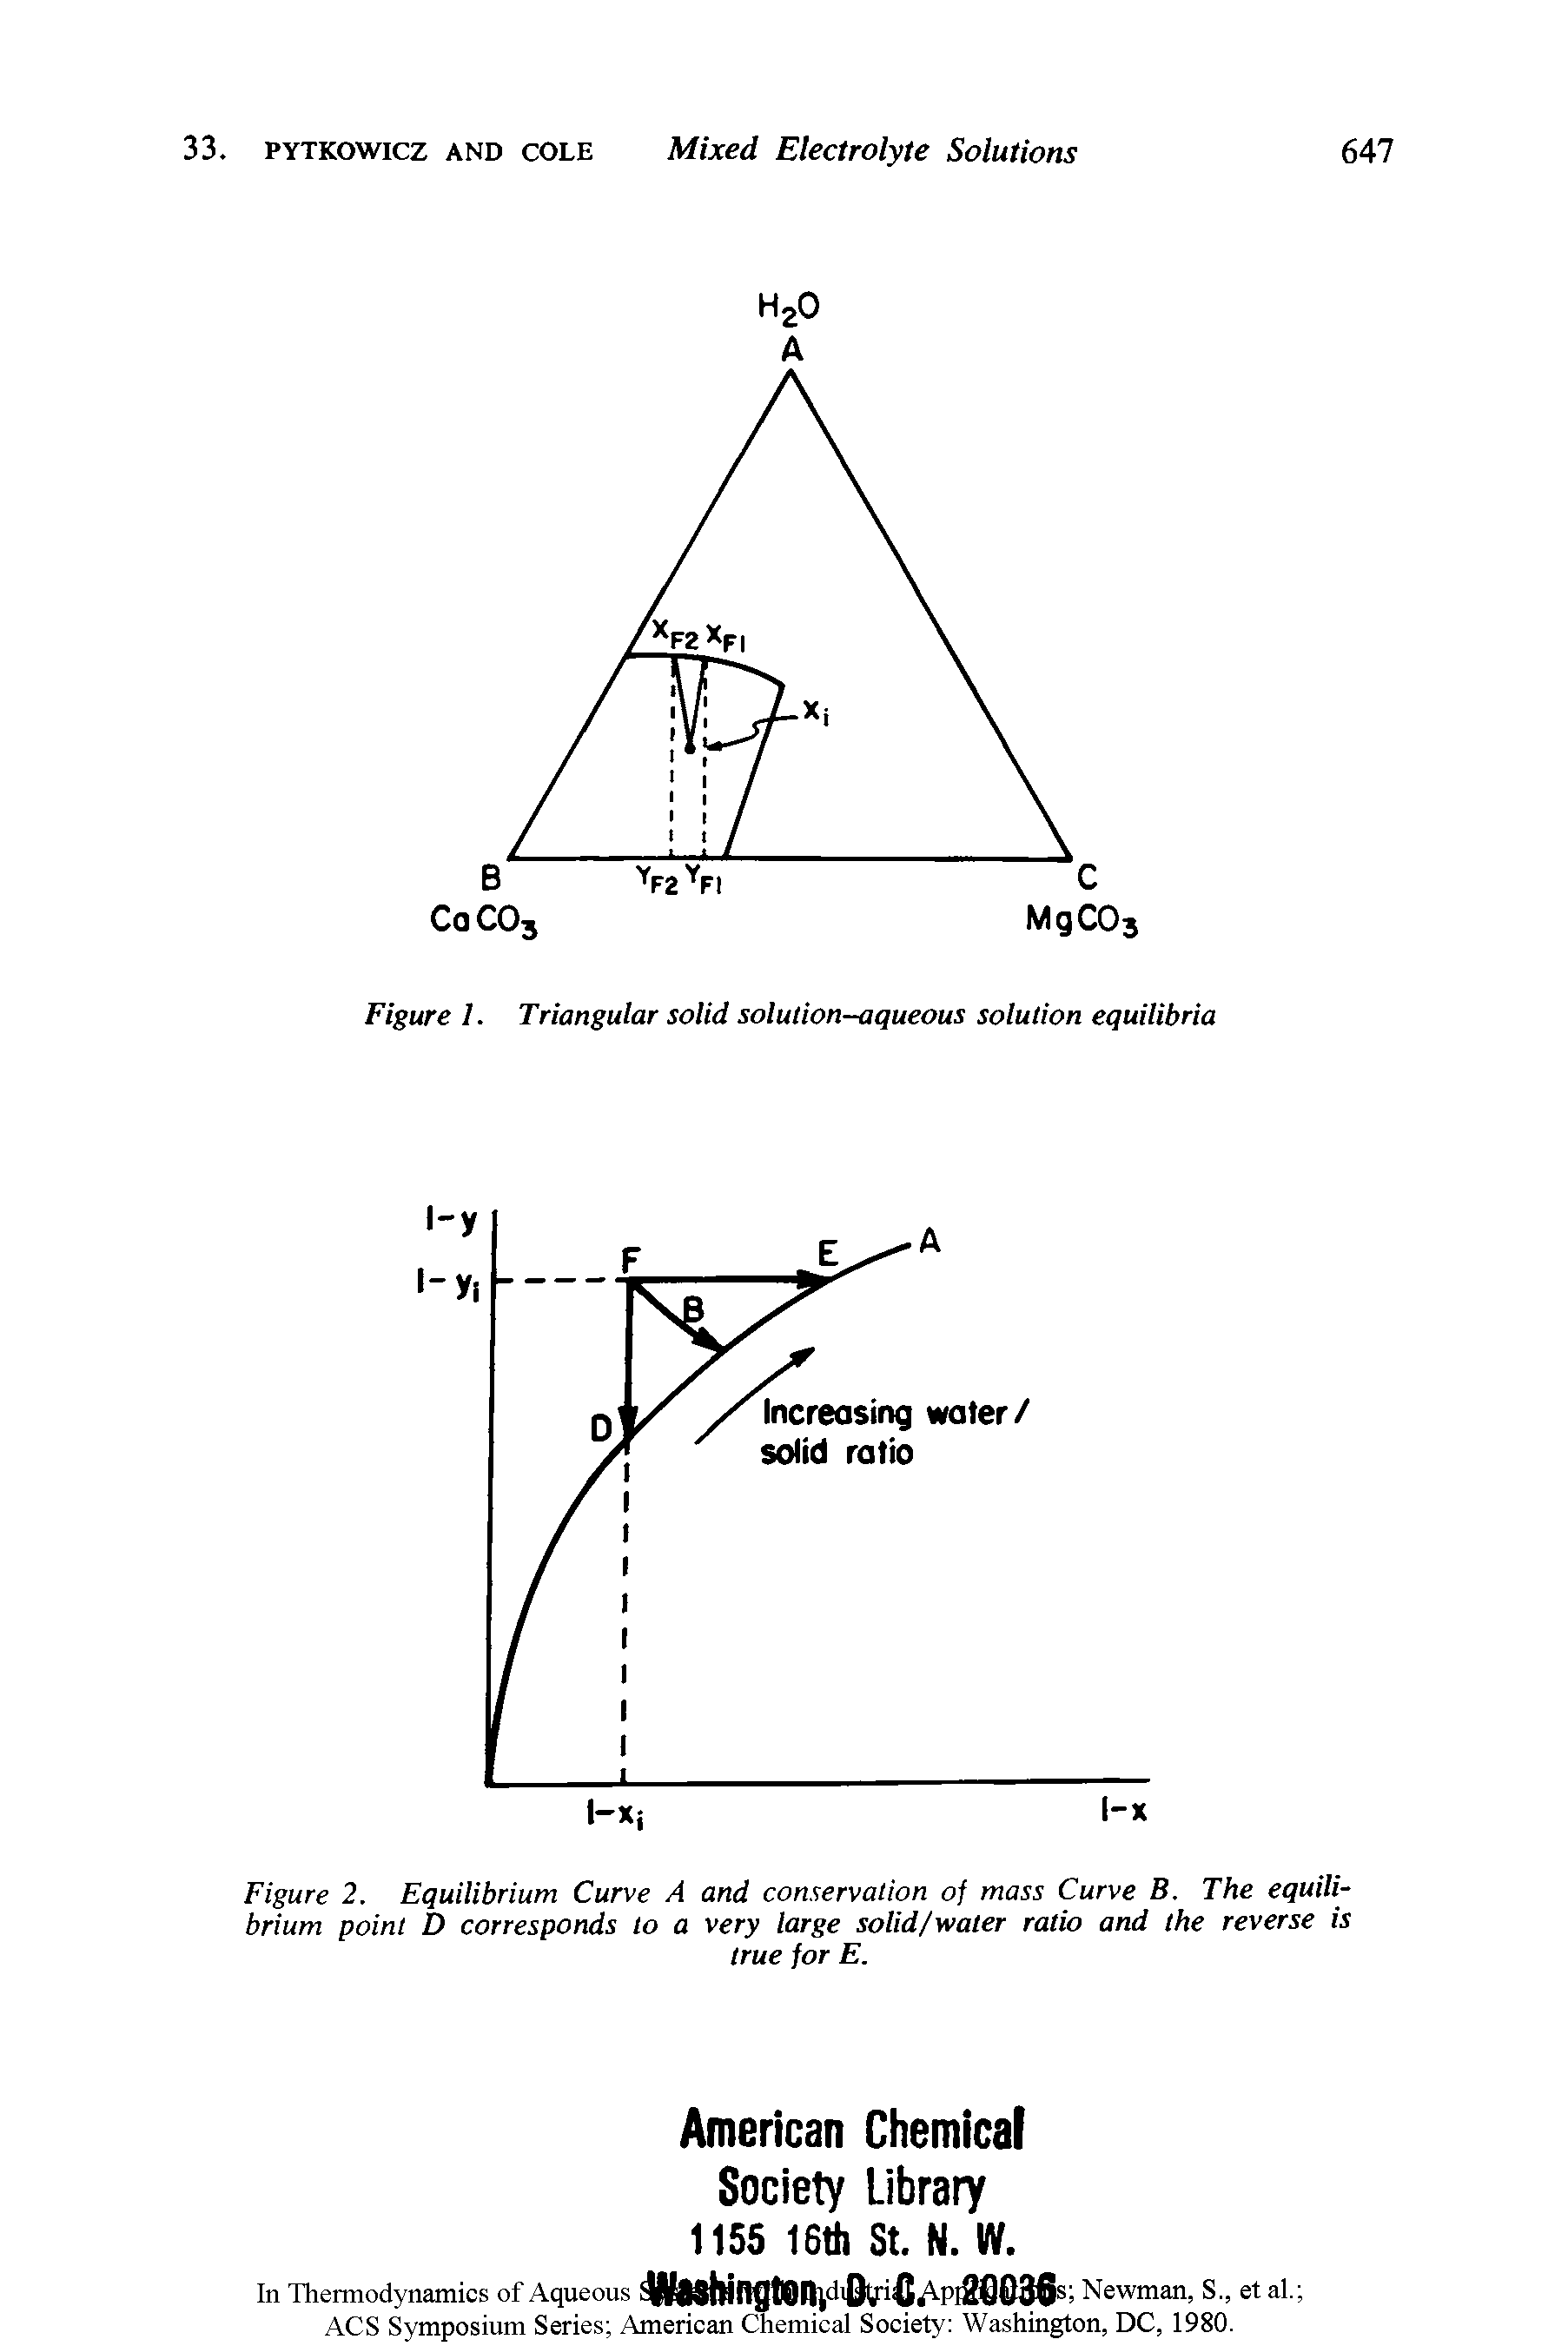 Figure 2. Equilibrium Curve A and conservation of mass Curve B. The equilibrium point D corresponds to a very large solid/water ratio and the reverse is...